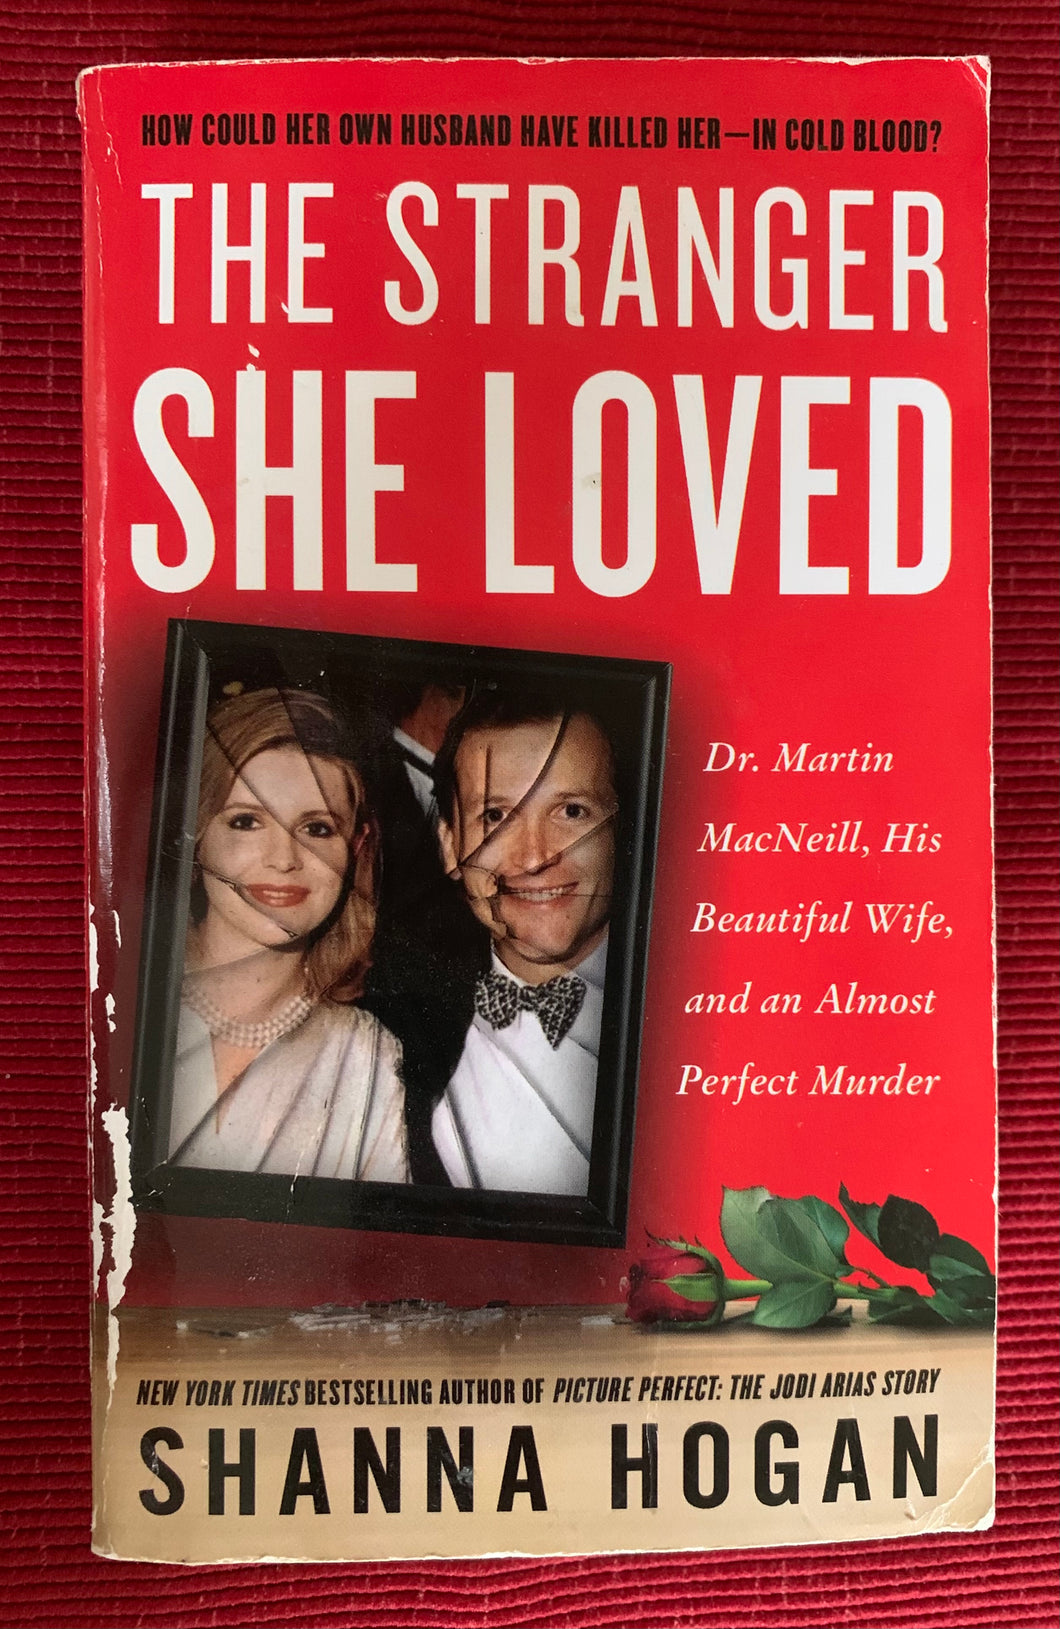 The Stranger She Loved: Dr. Martin MacNeill, His Beautiful Wife, and an Almost Perfect Murder